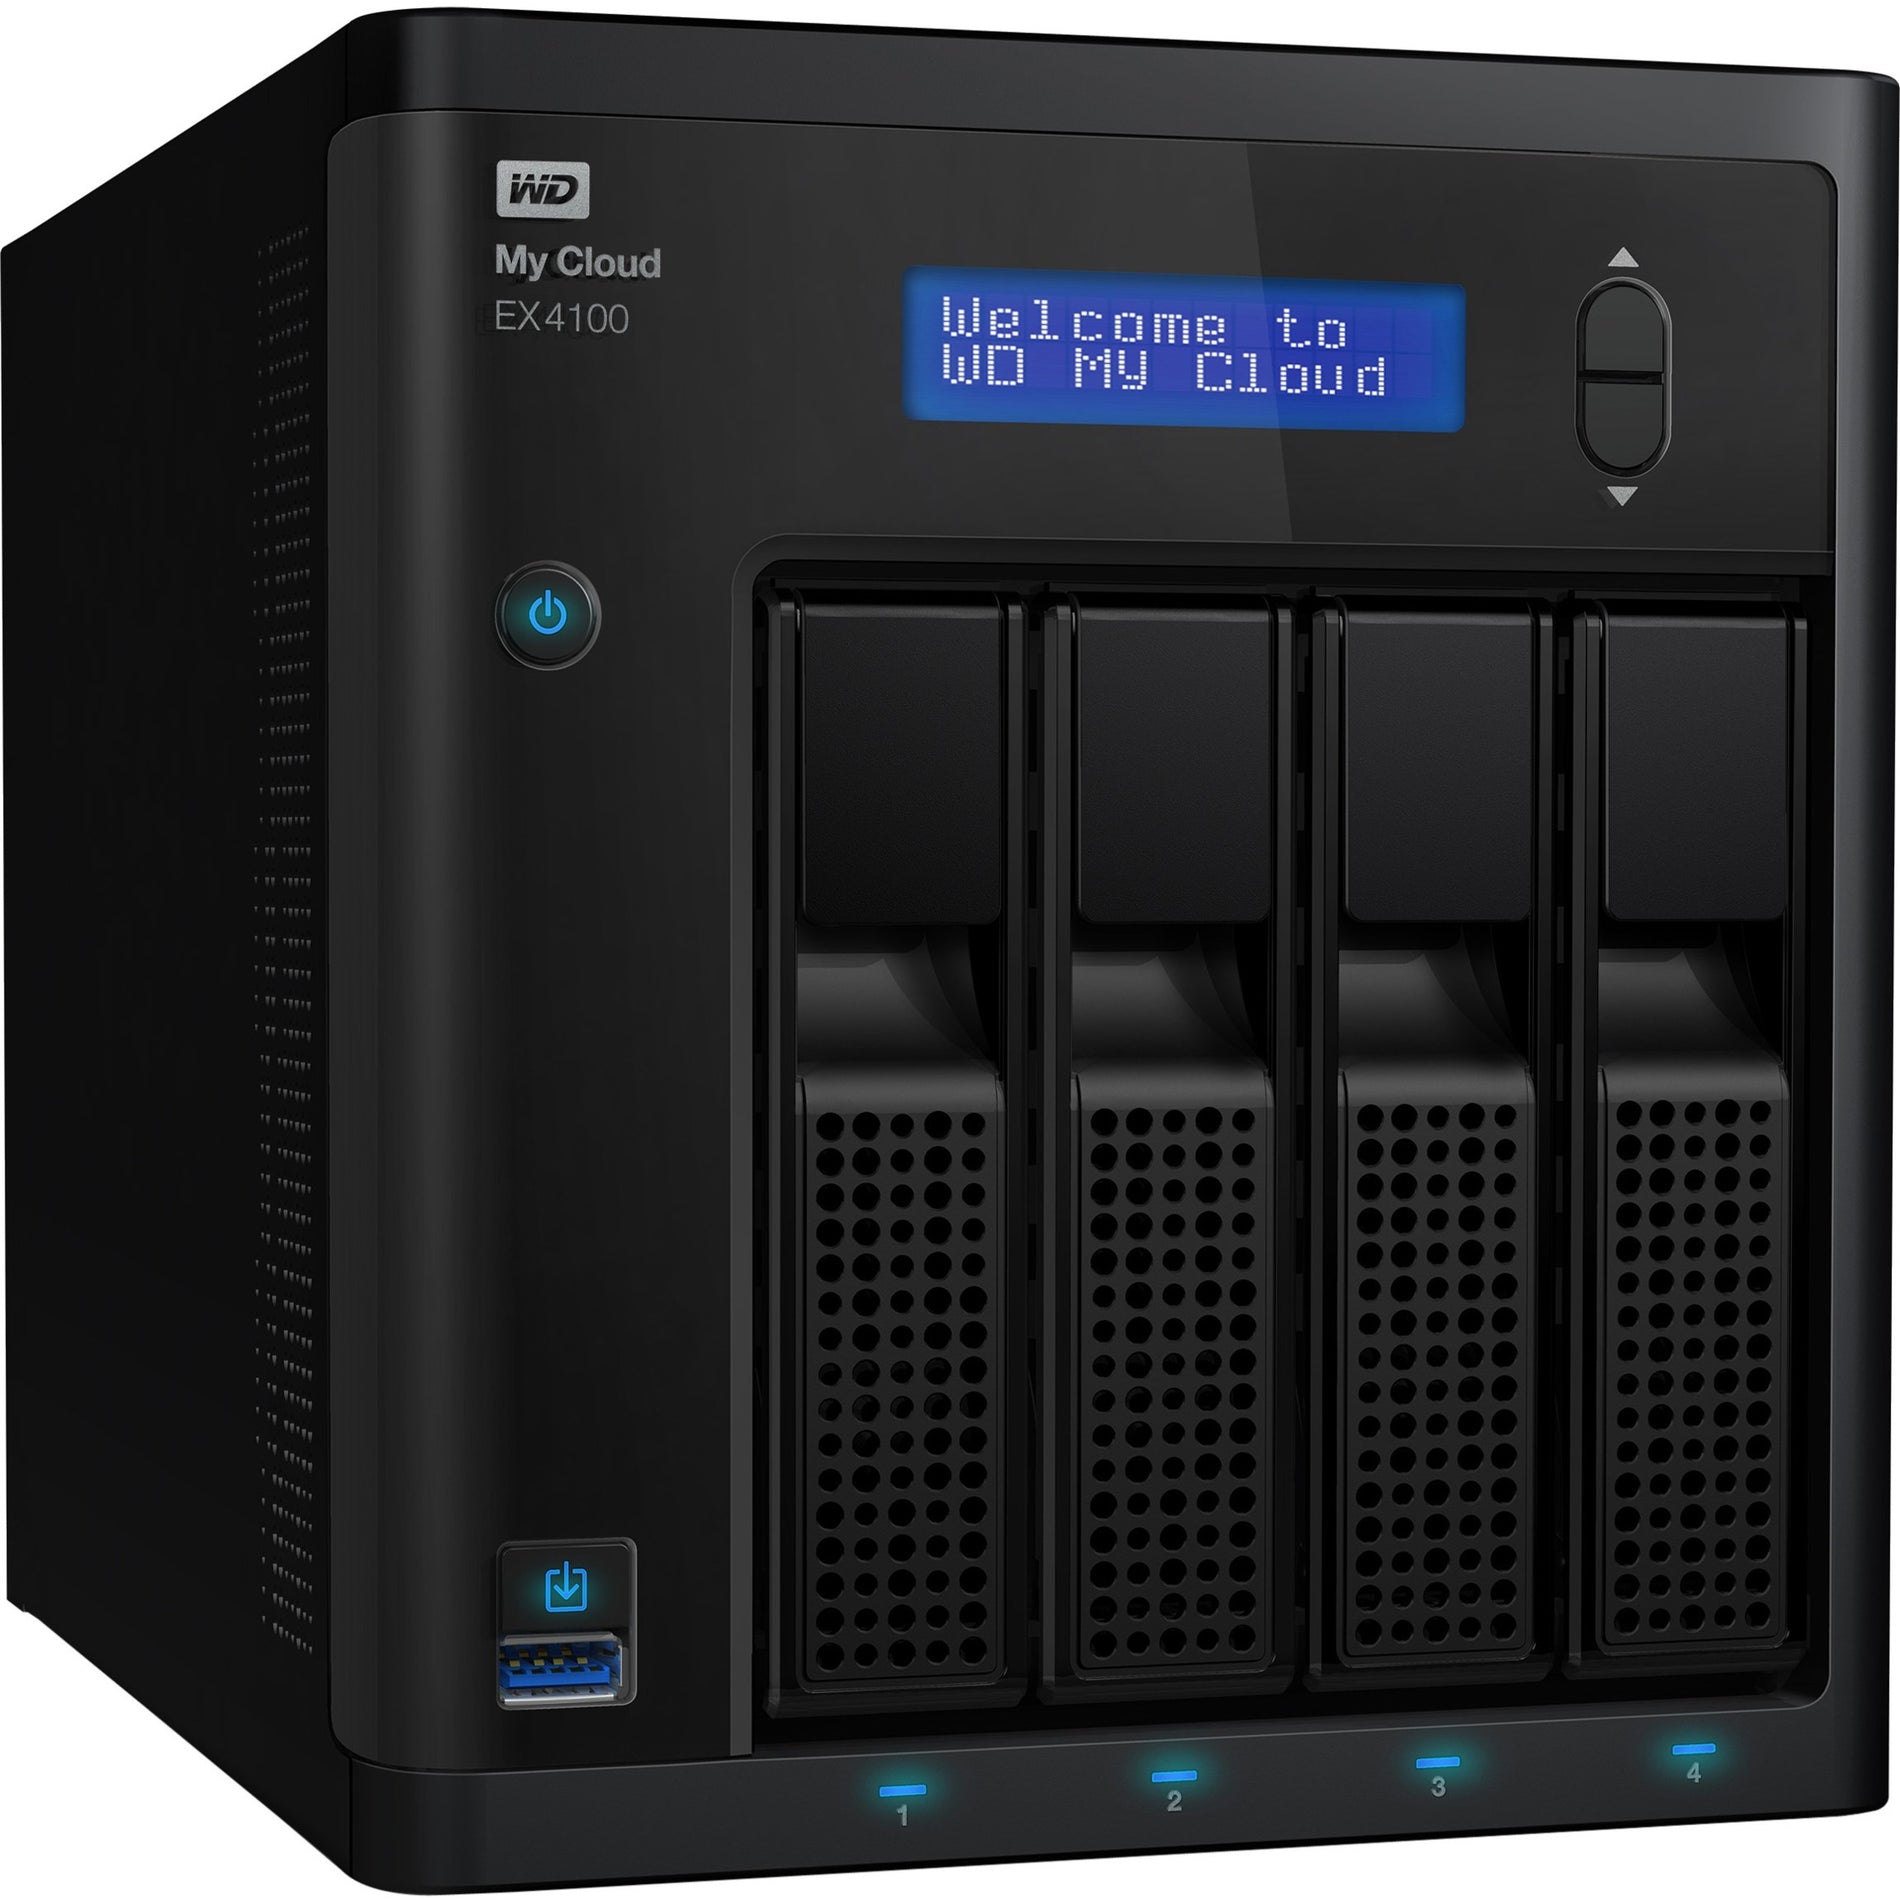 WD My Cloud Business Series EX4100 16TB 4-Bay Pre-configured NAS [Discontinued]